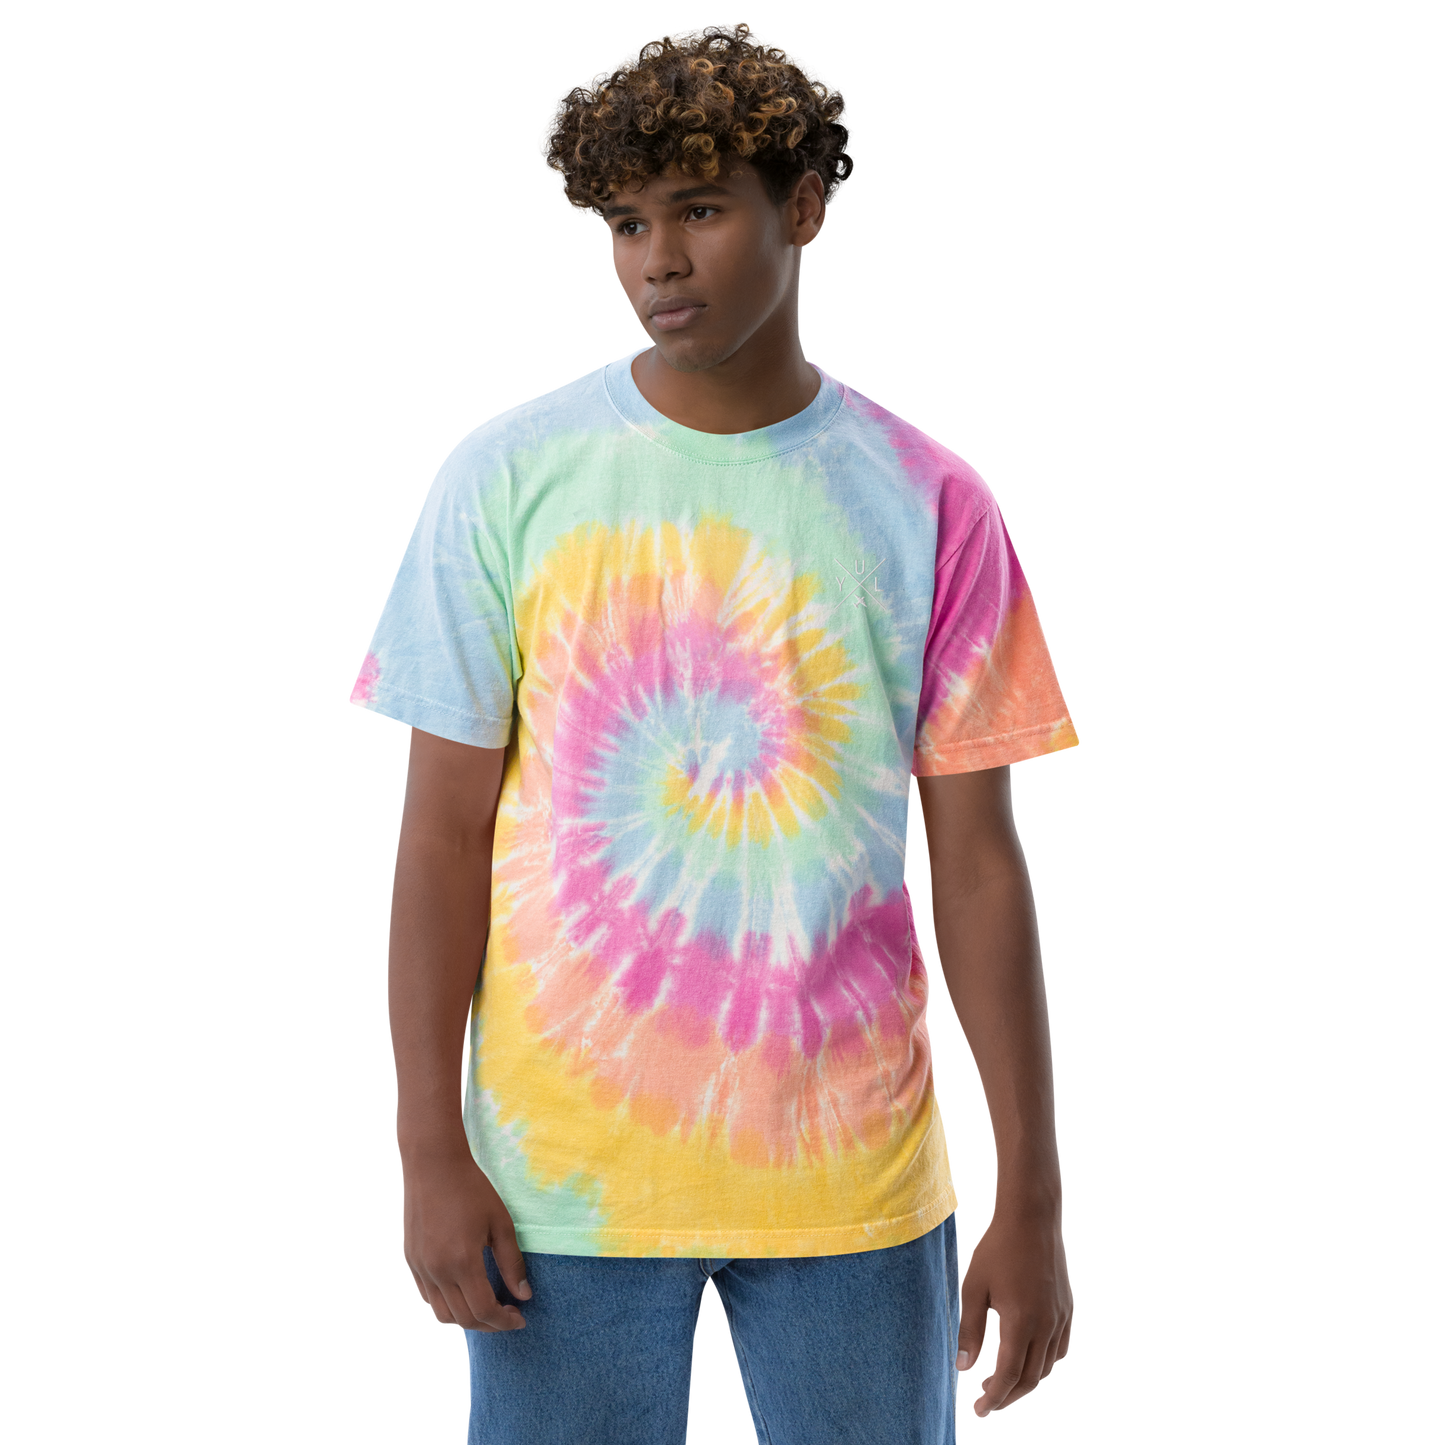 YHM Designs - YUL Montreal Oversized Tie-Dye T-Shirt - Crossed-X Design with Airport Code and Vintage Propliner - White Embroidery - Image 04